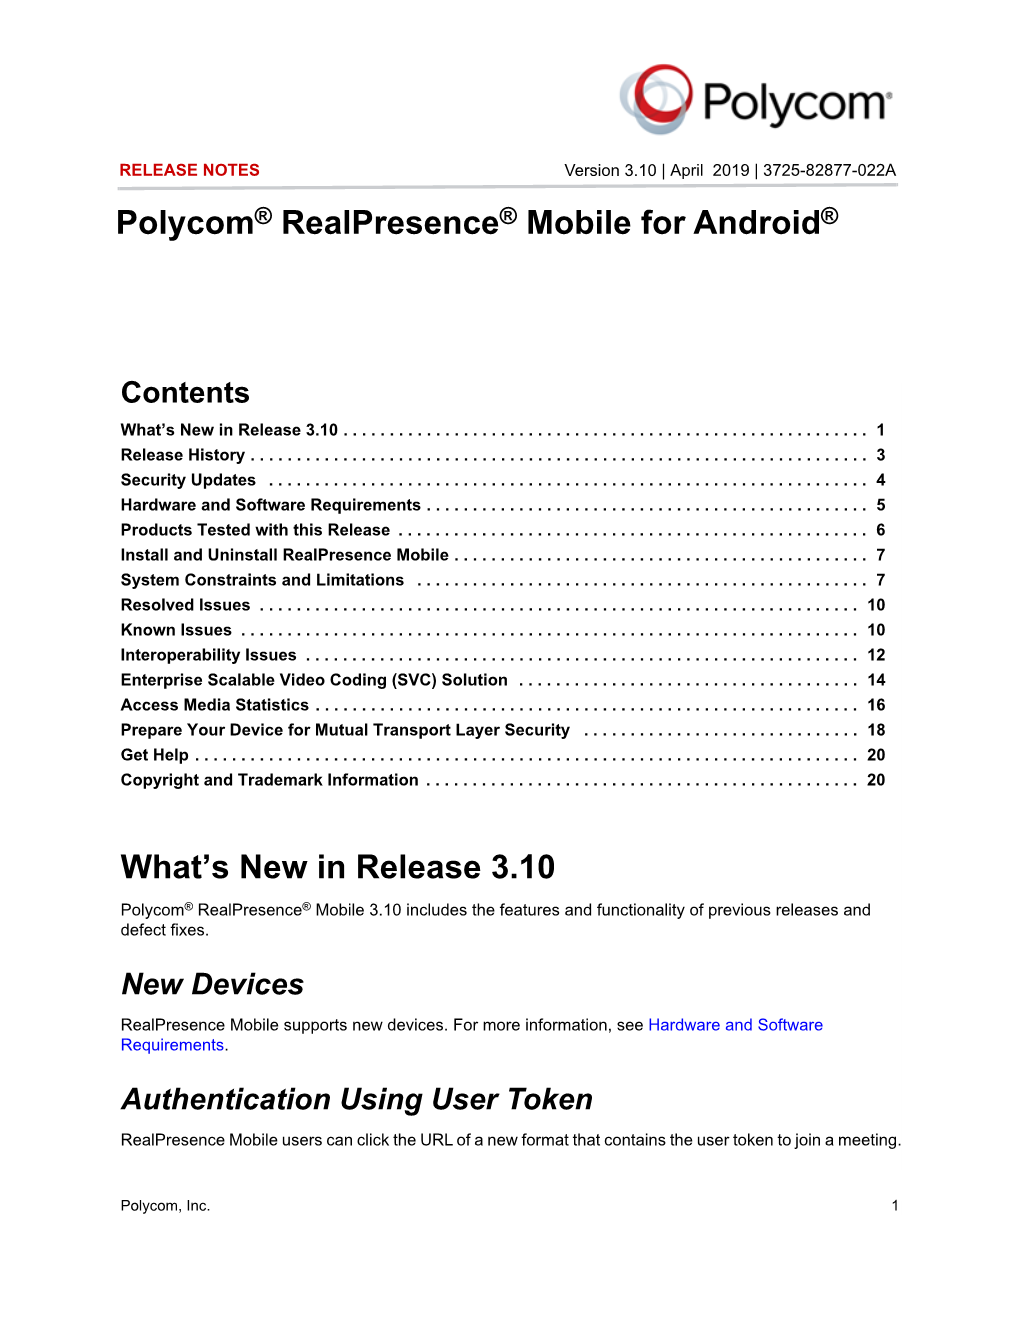 Polycom Realpresence Mobile for Android Release Notes 3.10